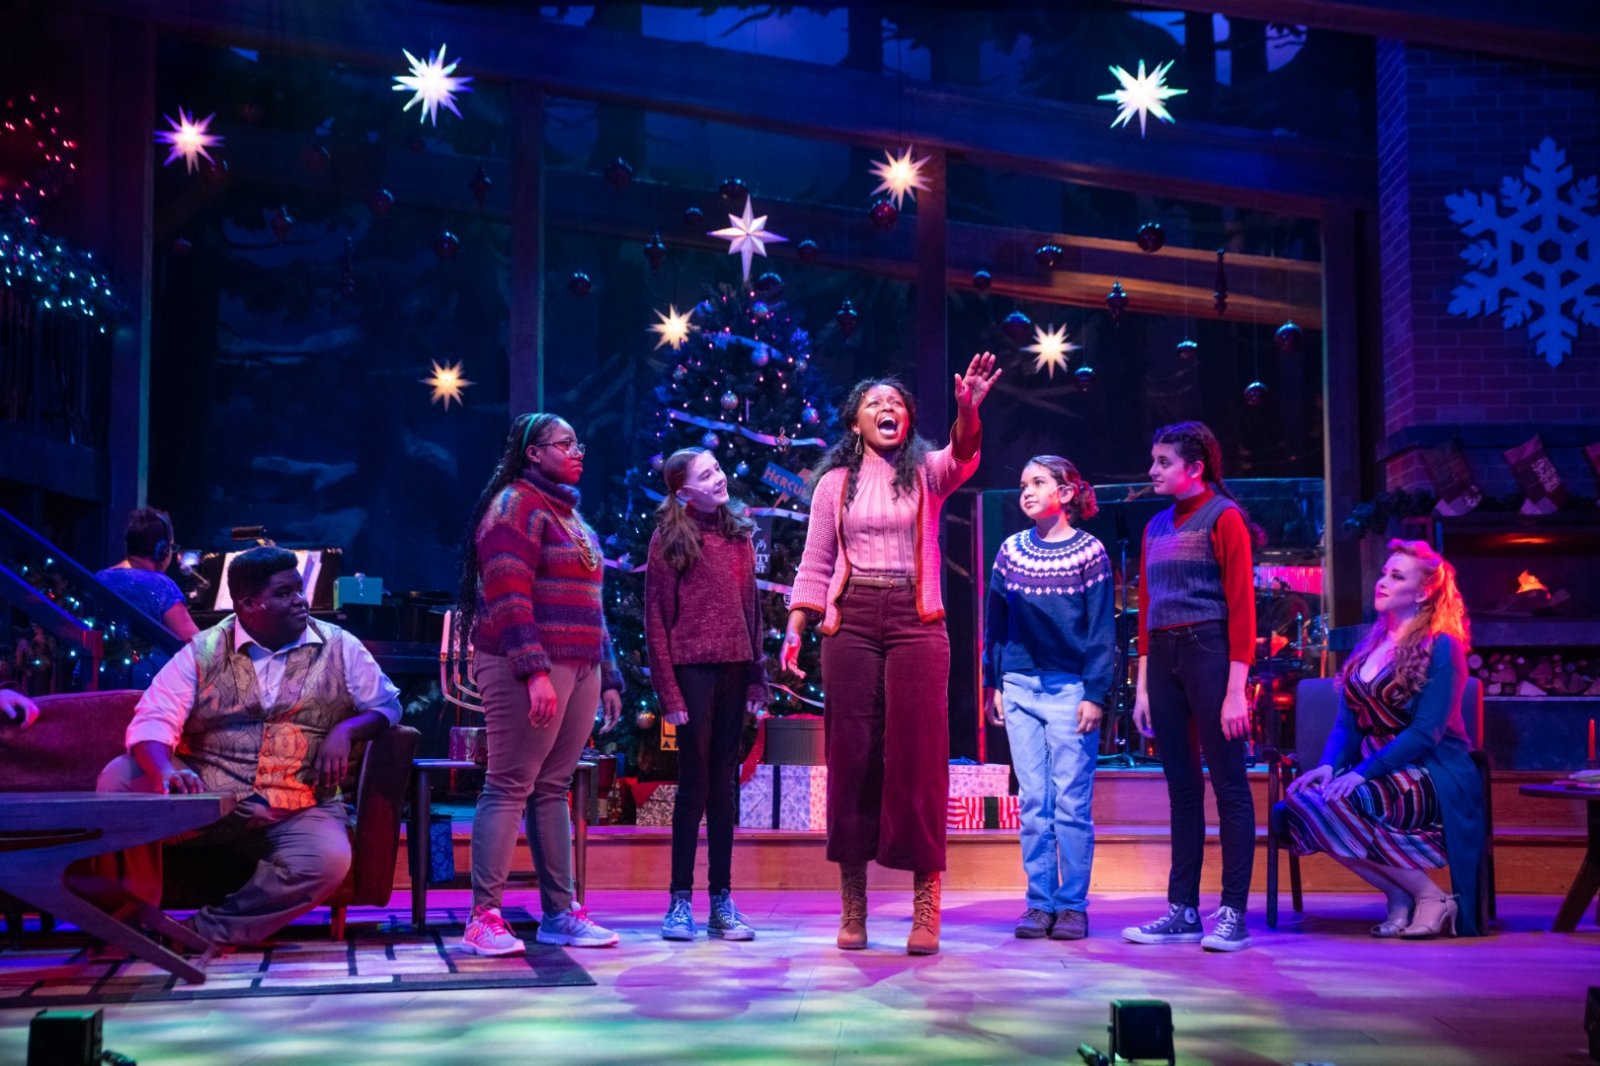 (l. to r.) Kevin James Sievert, Naima Gaines, Bristol Beasley, Daryn Alexus, Ella Caglin, Taylor Arnstein and Samantha Sostarich (Adult Cast) in Skylight Music Theatre’s production of A Jolly Holiday: Celebrating Disney’s Broadway Hits.